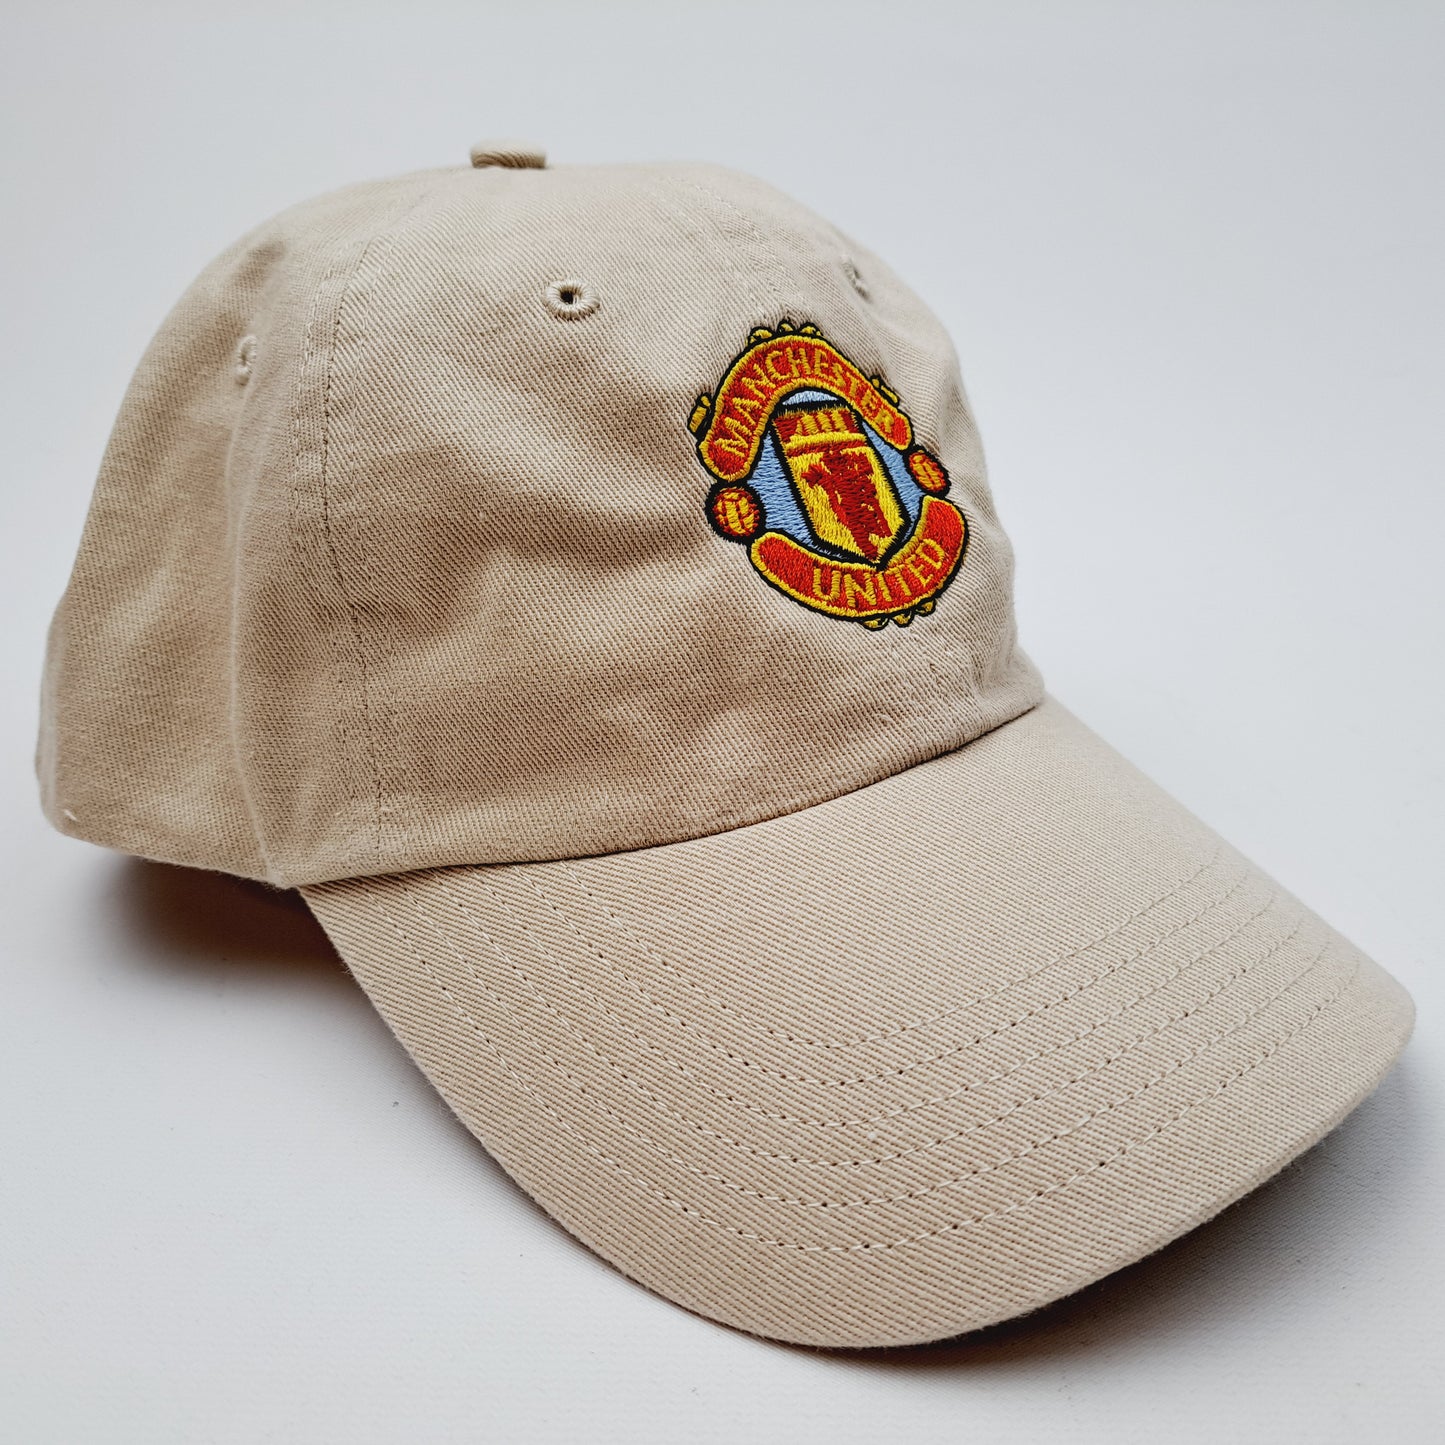 Manchester United Football Soccer Club Relaxed Cotton Cap Hat Tan